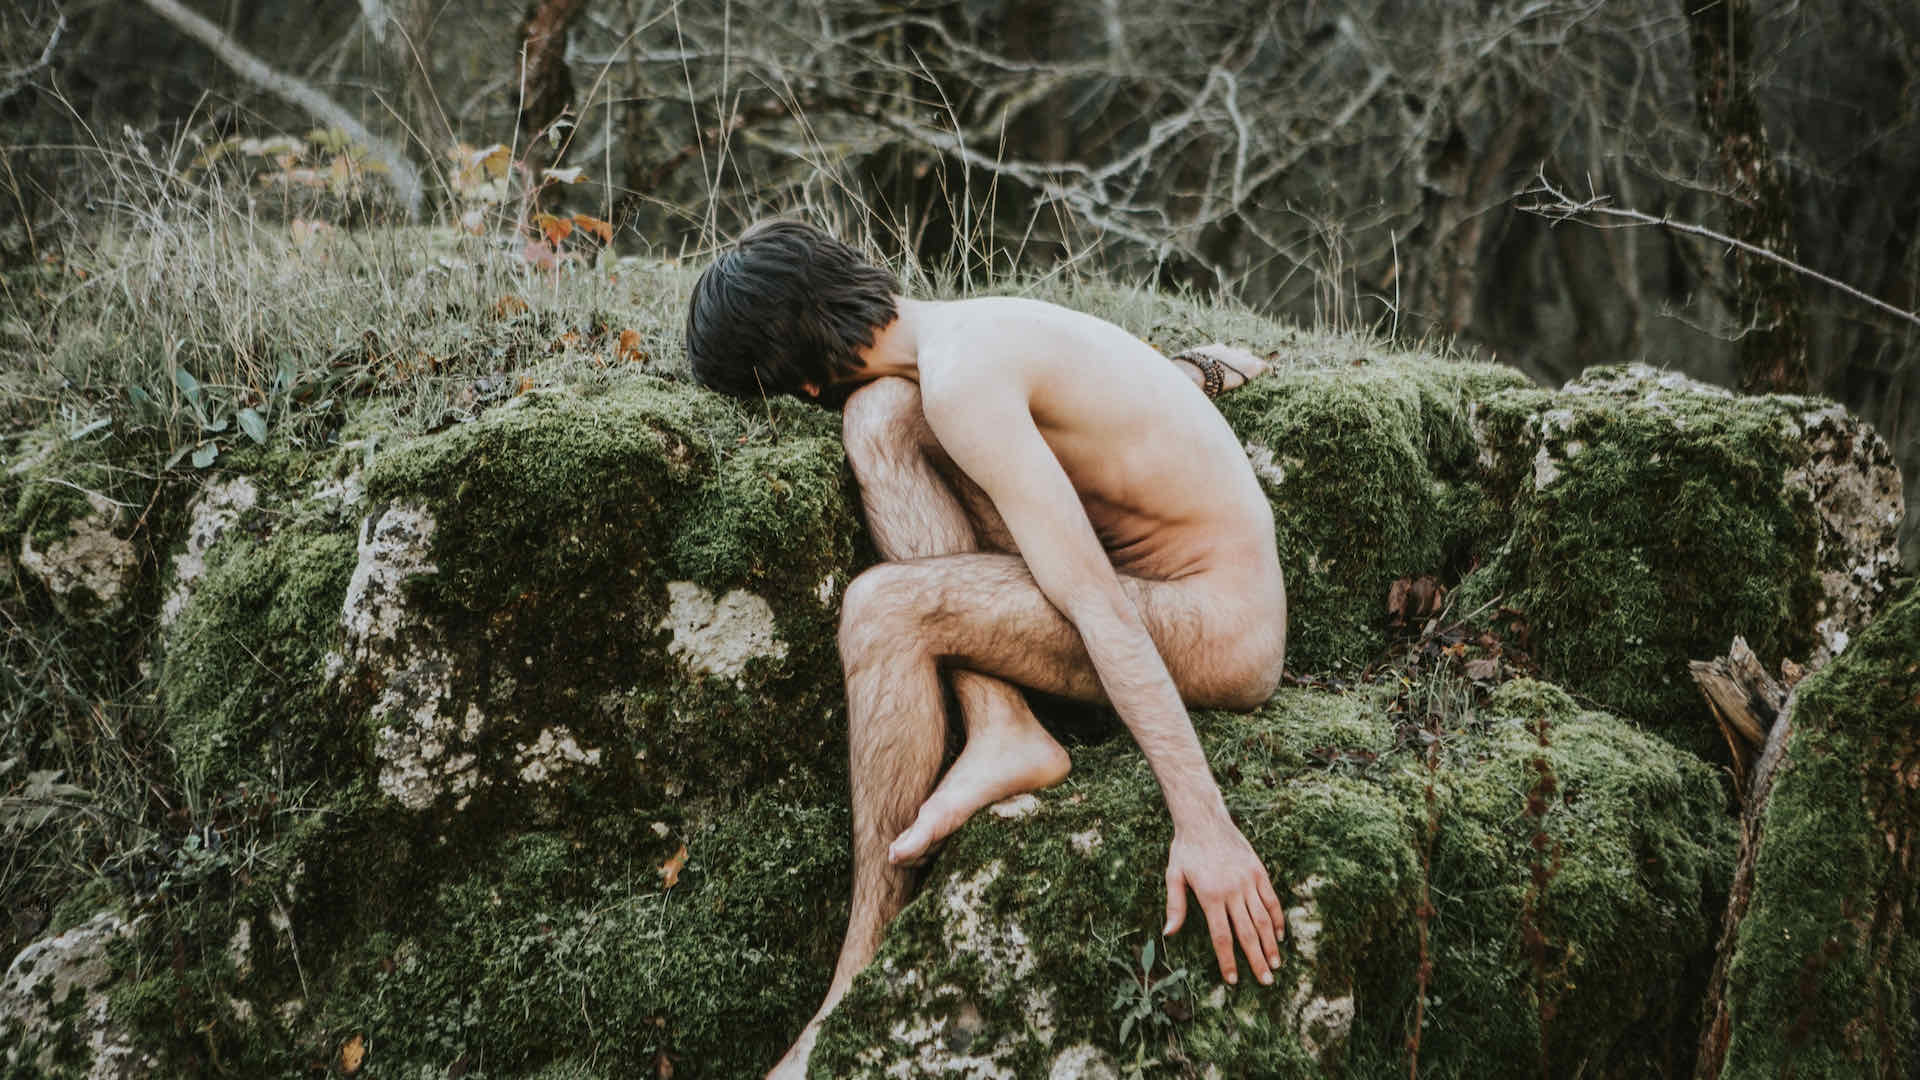 Naked man in nature